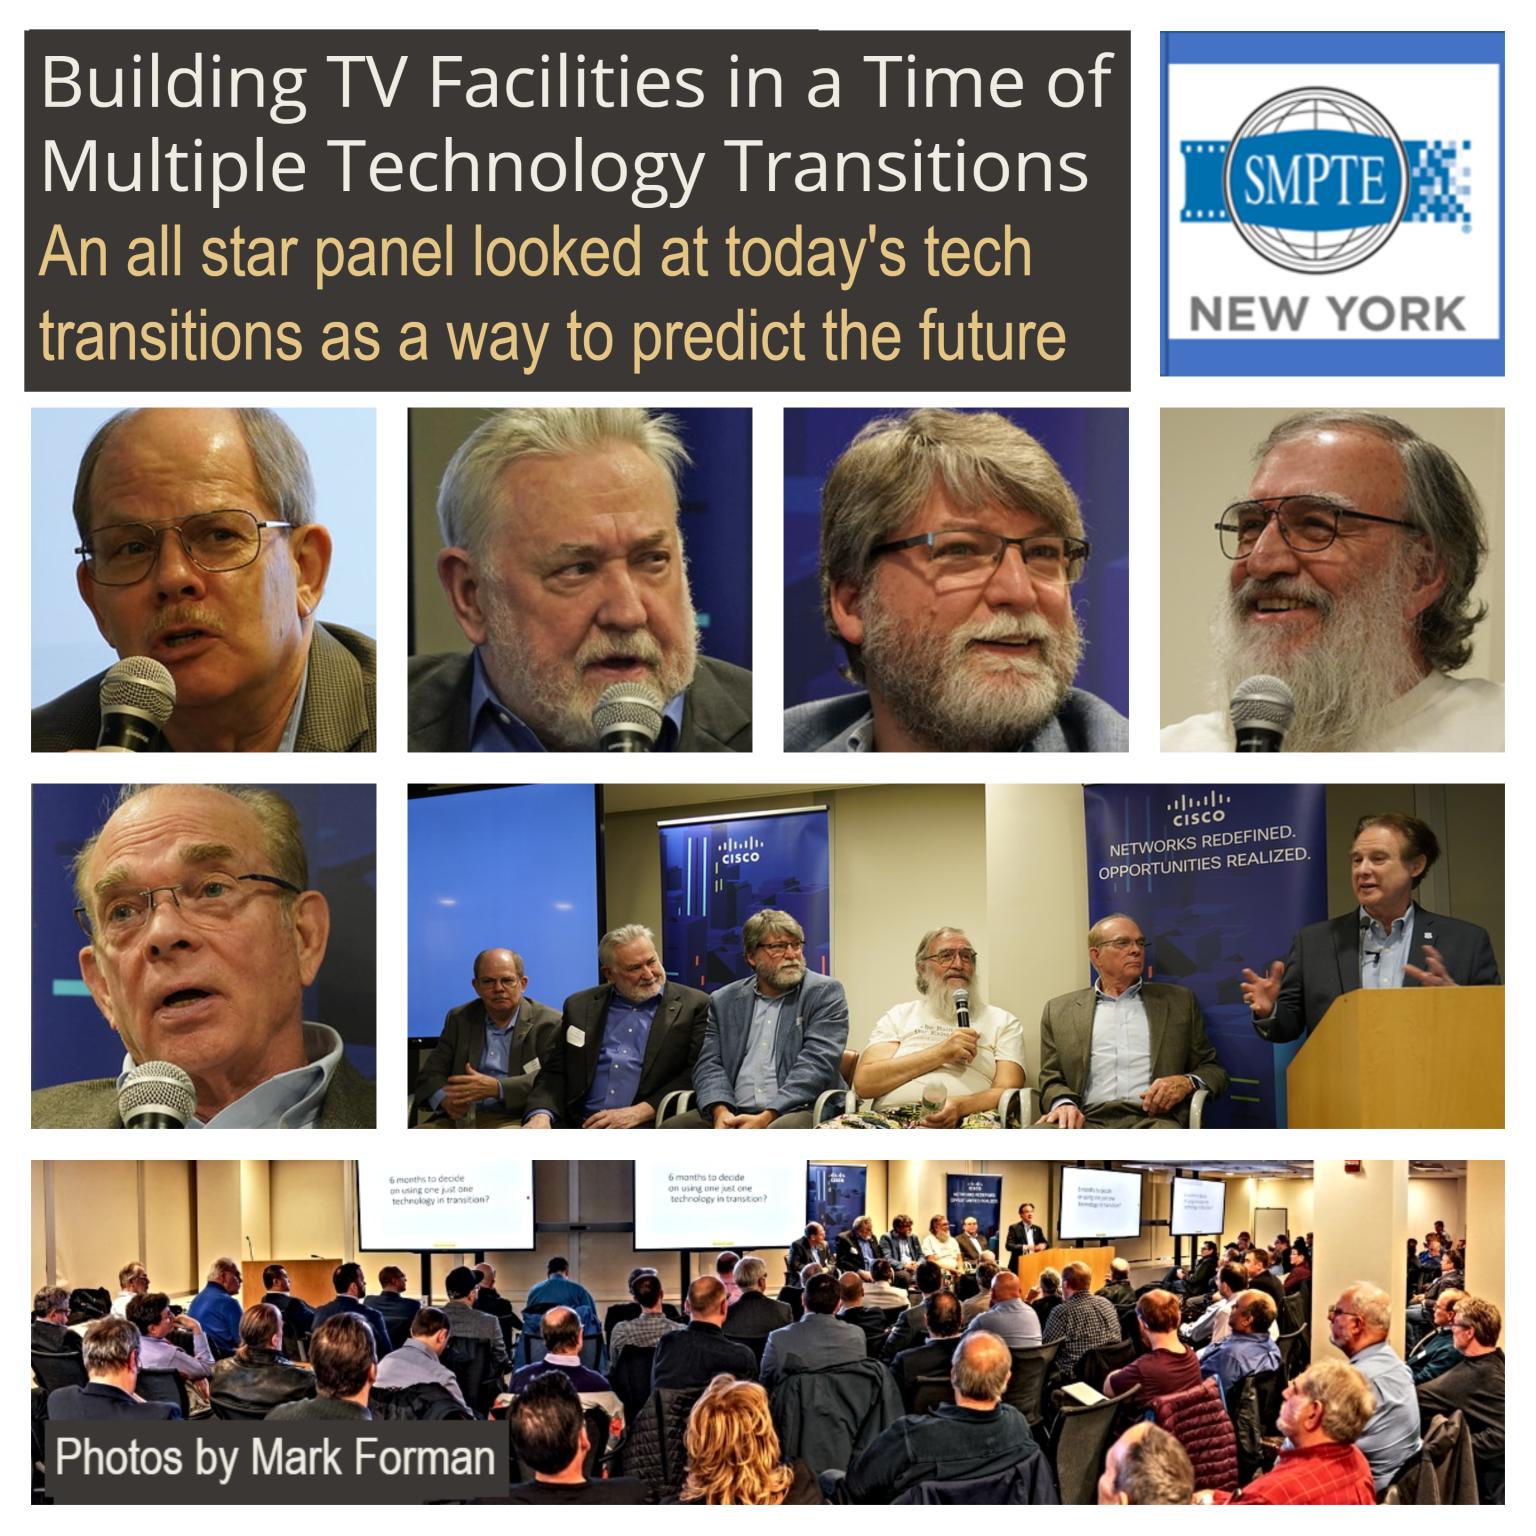 January 2020 SMPTE Facilities in Transition